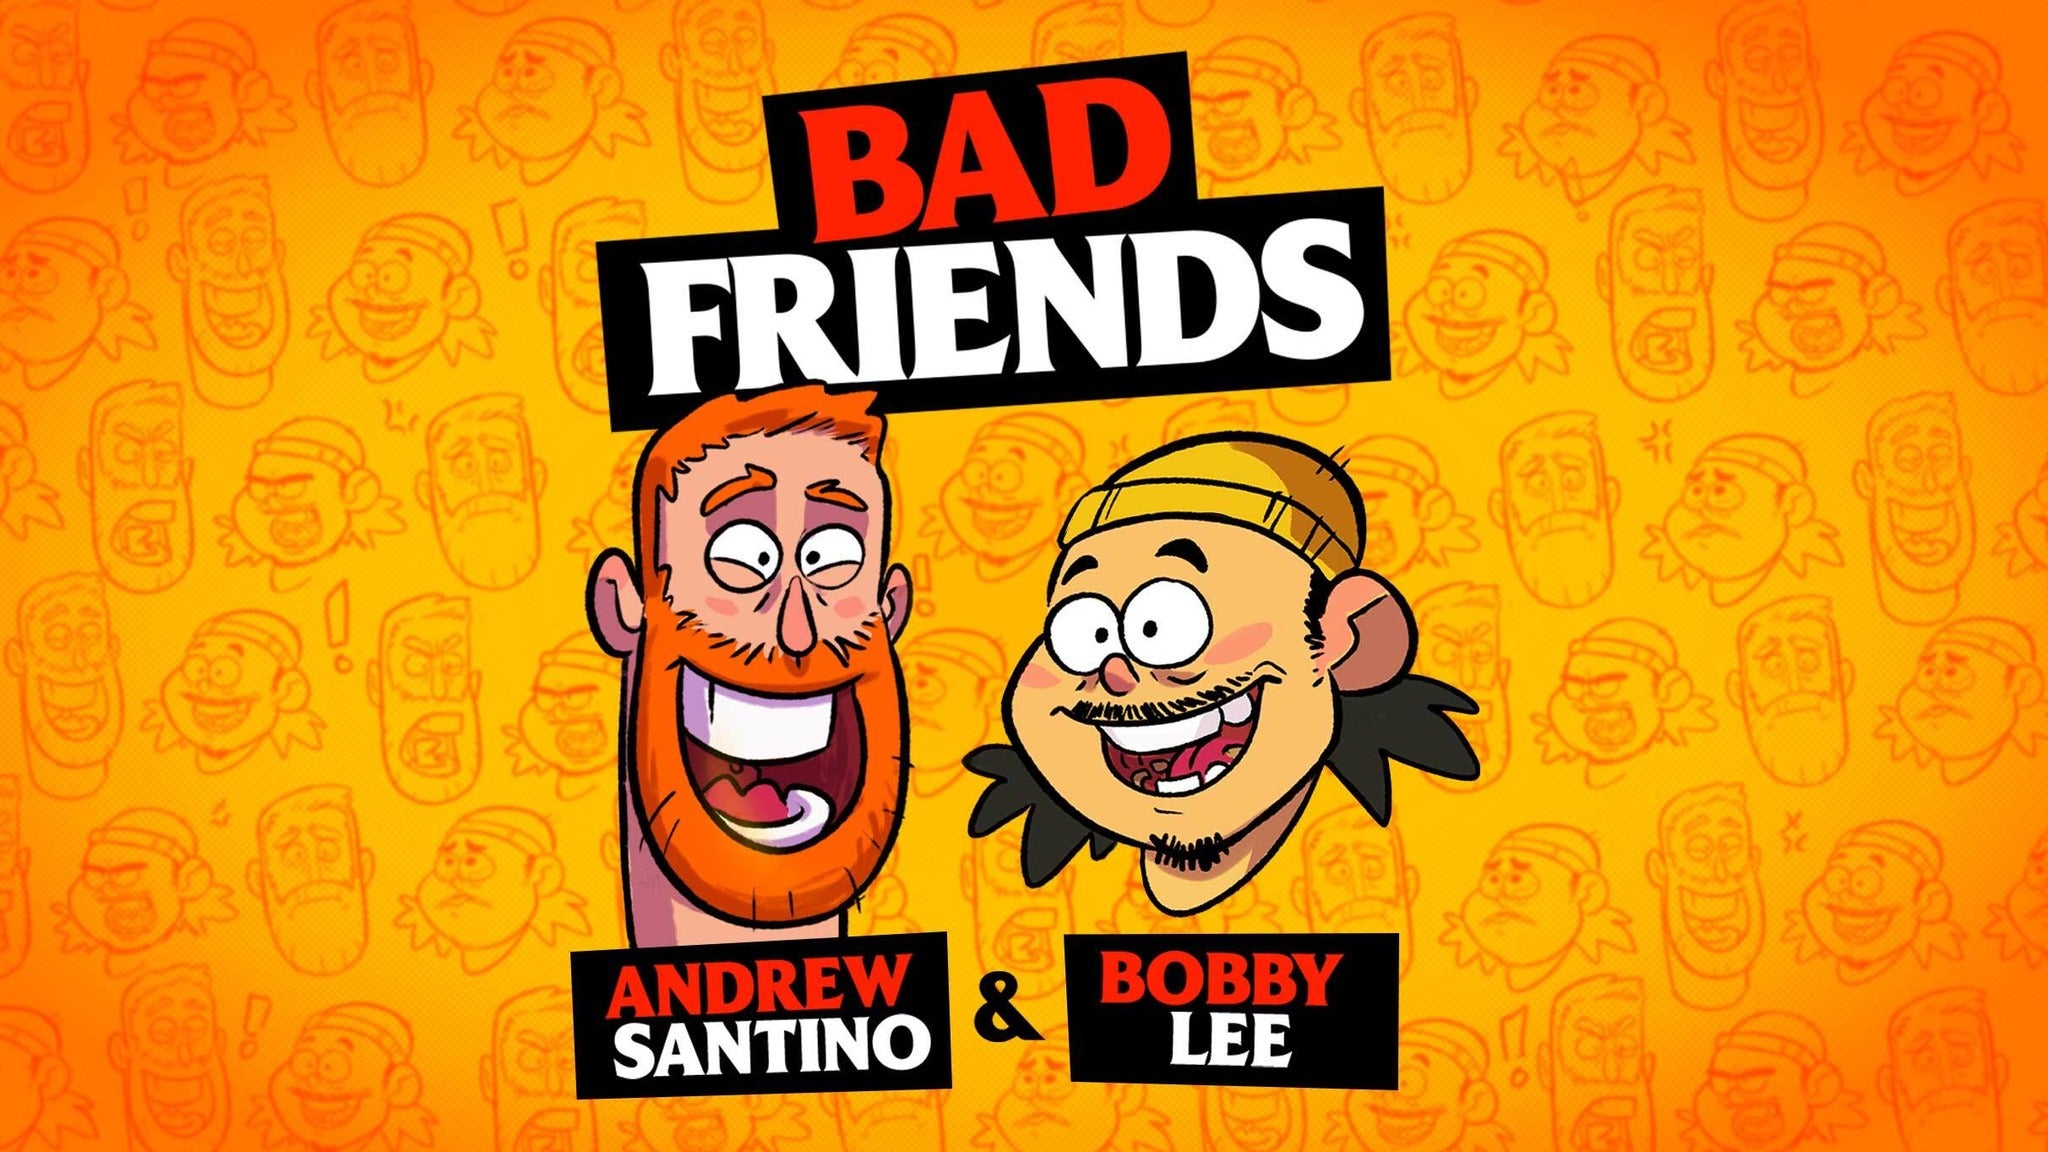 Bad Friends with Andrew Santino & Bobby Lee at The Criterion